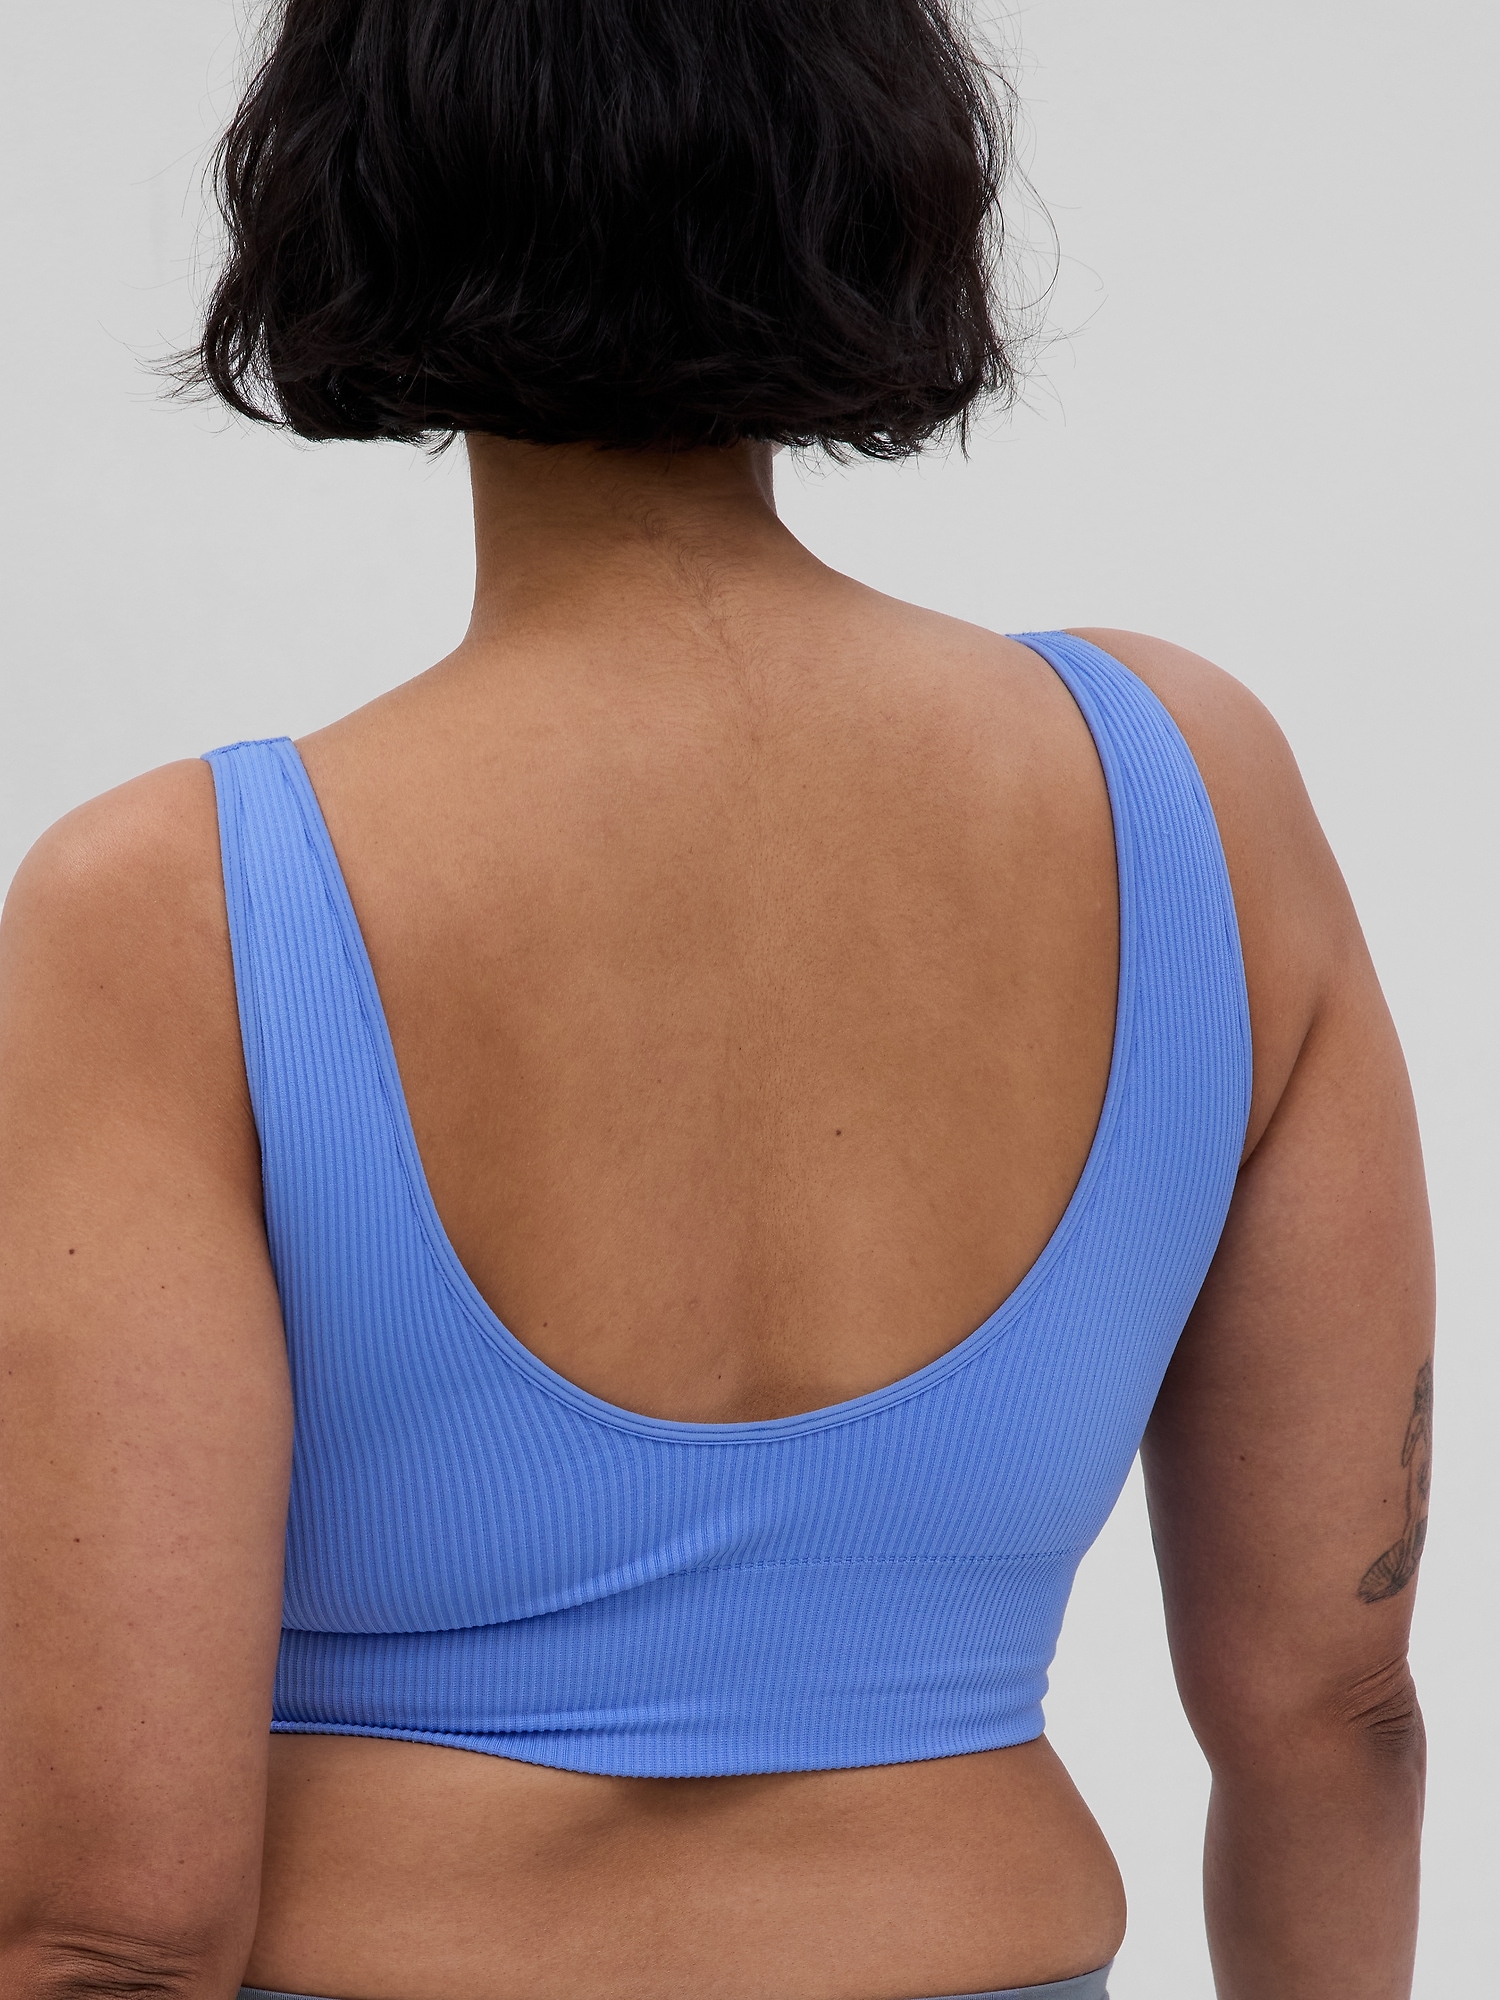 Find more Lululemon Light Pink Strappy Sports Bra Size 10 for sale at up to  90% off